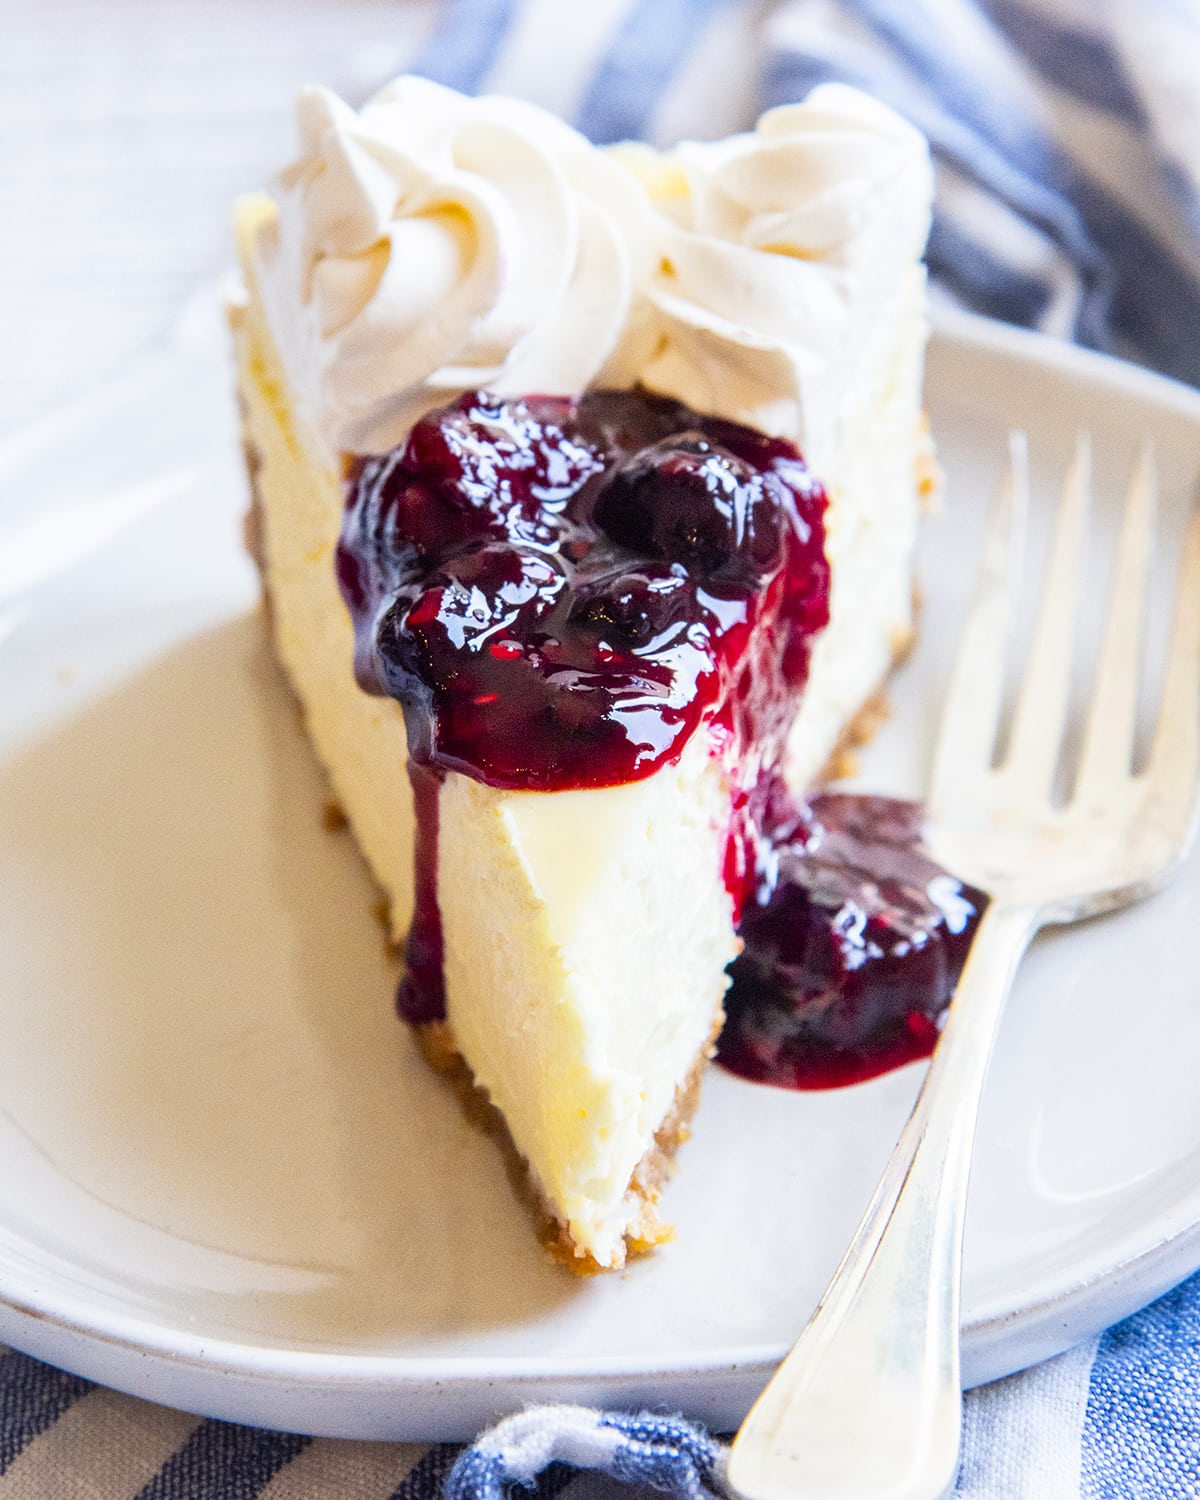 A slice of cheesecake on a plate topped with a berry sauce and whipped cream rosettes.